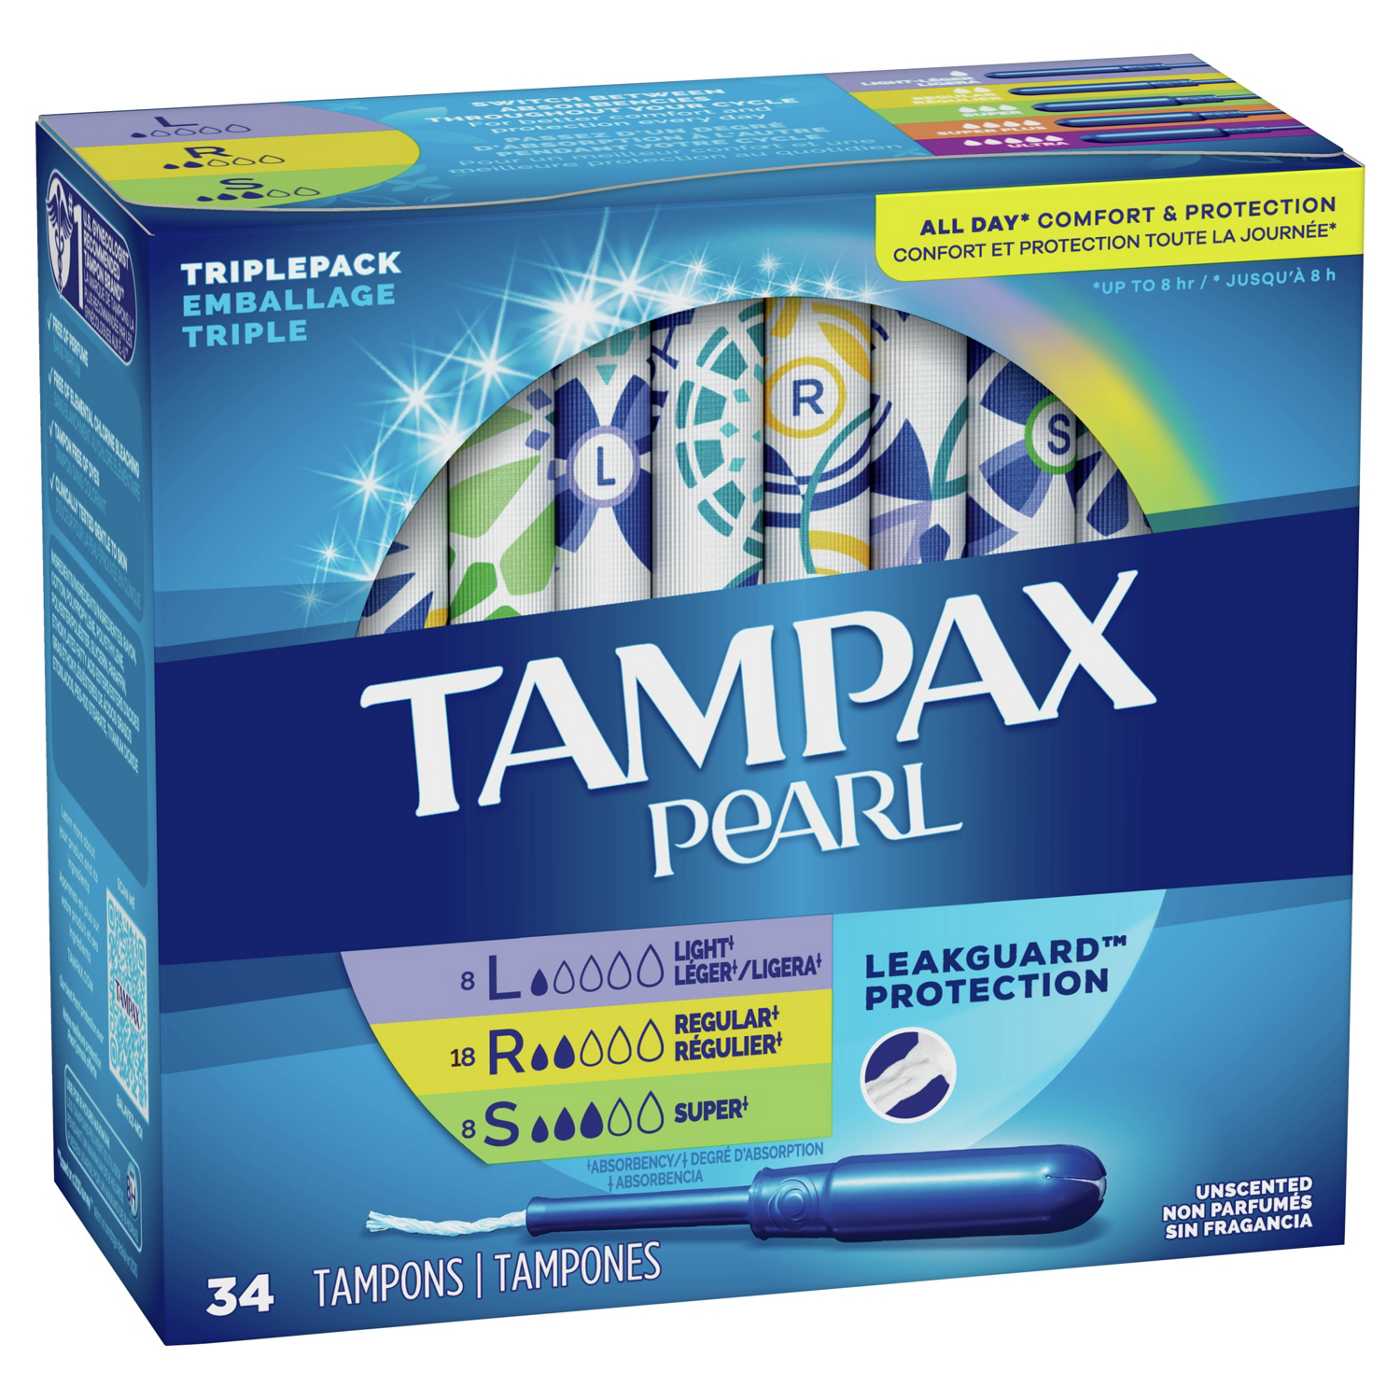 Tampax Pearl Tampons Trio Pack, Light/Regular/Super Unscented; image 2 of 5